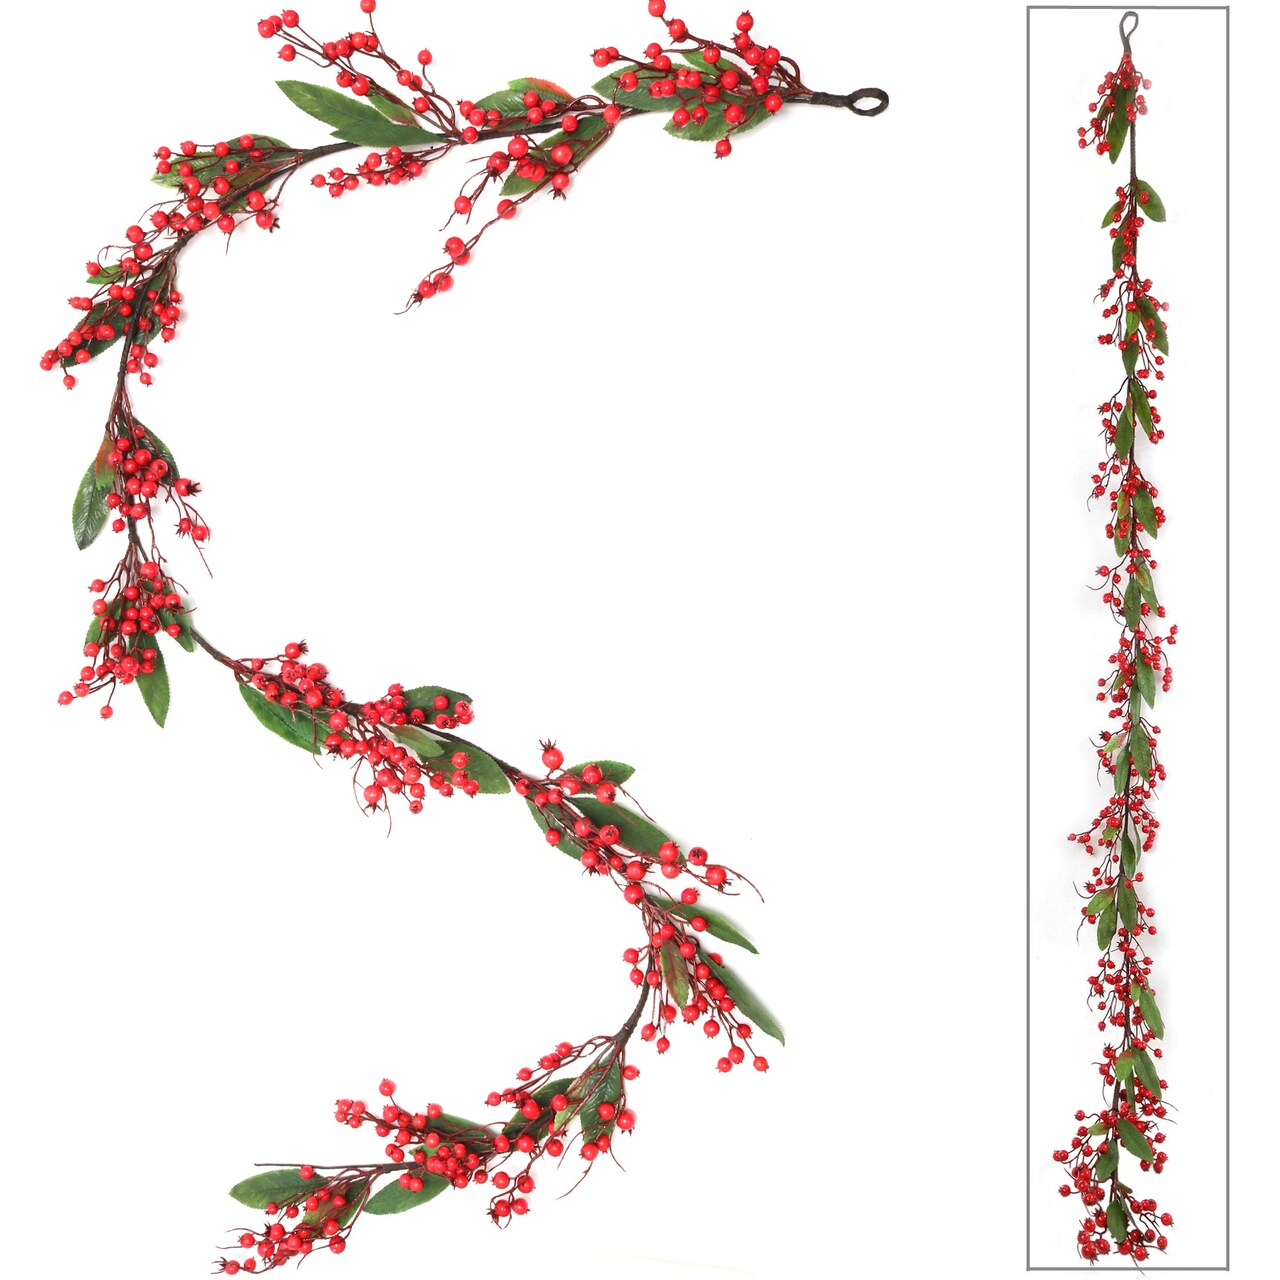 Red Berry Garland, 6-Foot, Lifelike Berries & Green Silk Foliage, Indoor/Outdoor Use, Festive Holiday Decor, Table & Mantel, Christmas  Garlands, Home & Office Decor (Set of 2)